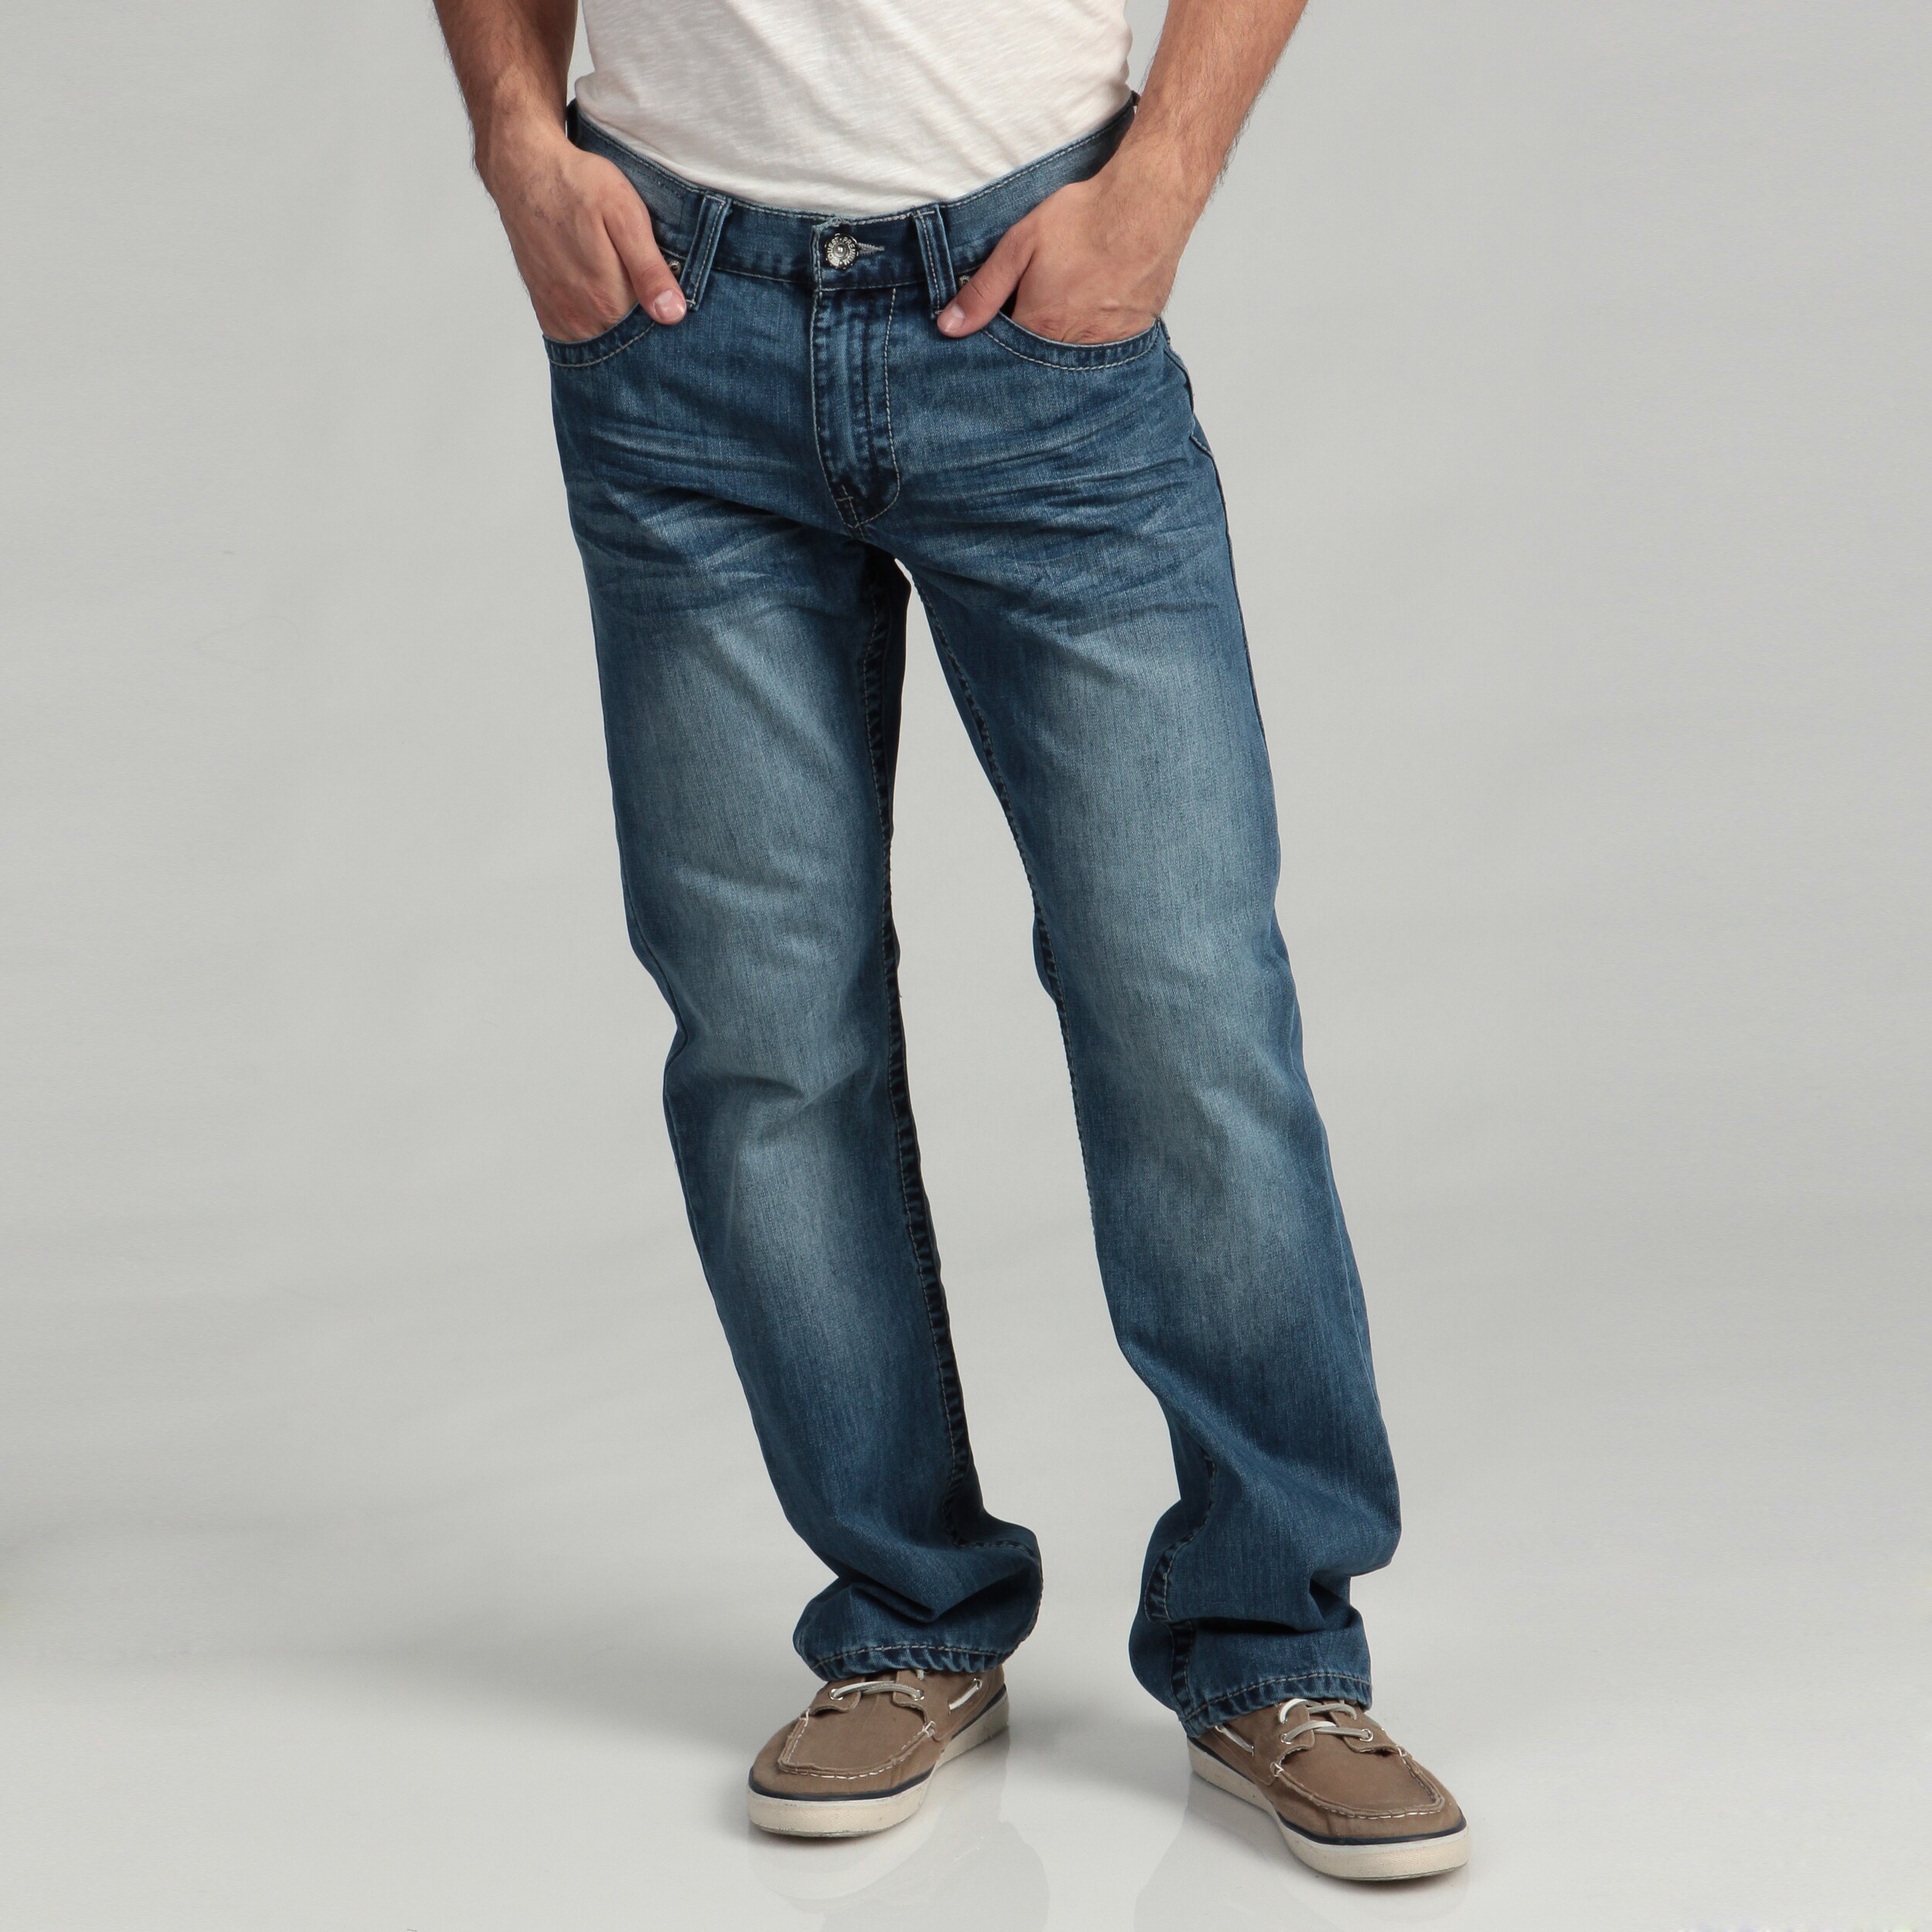 request jeans company